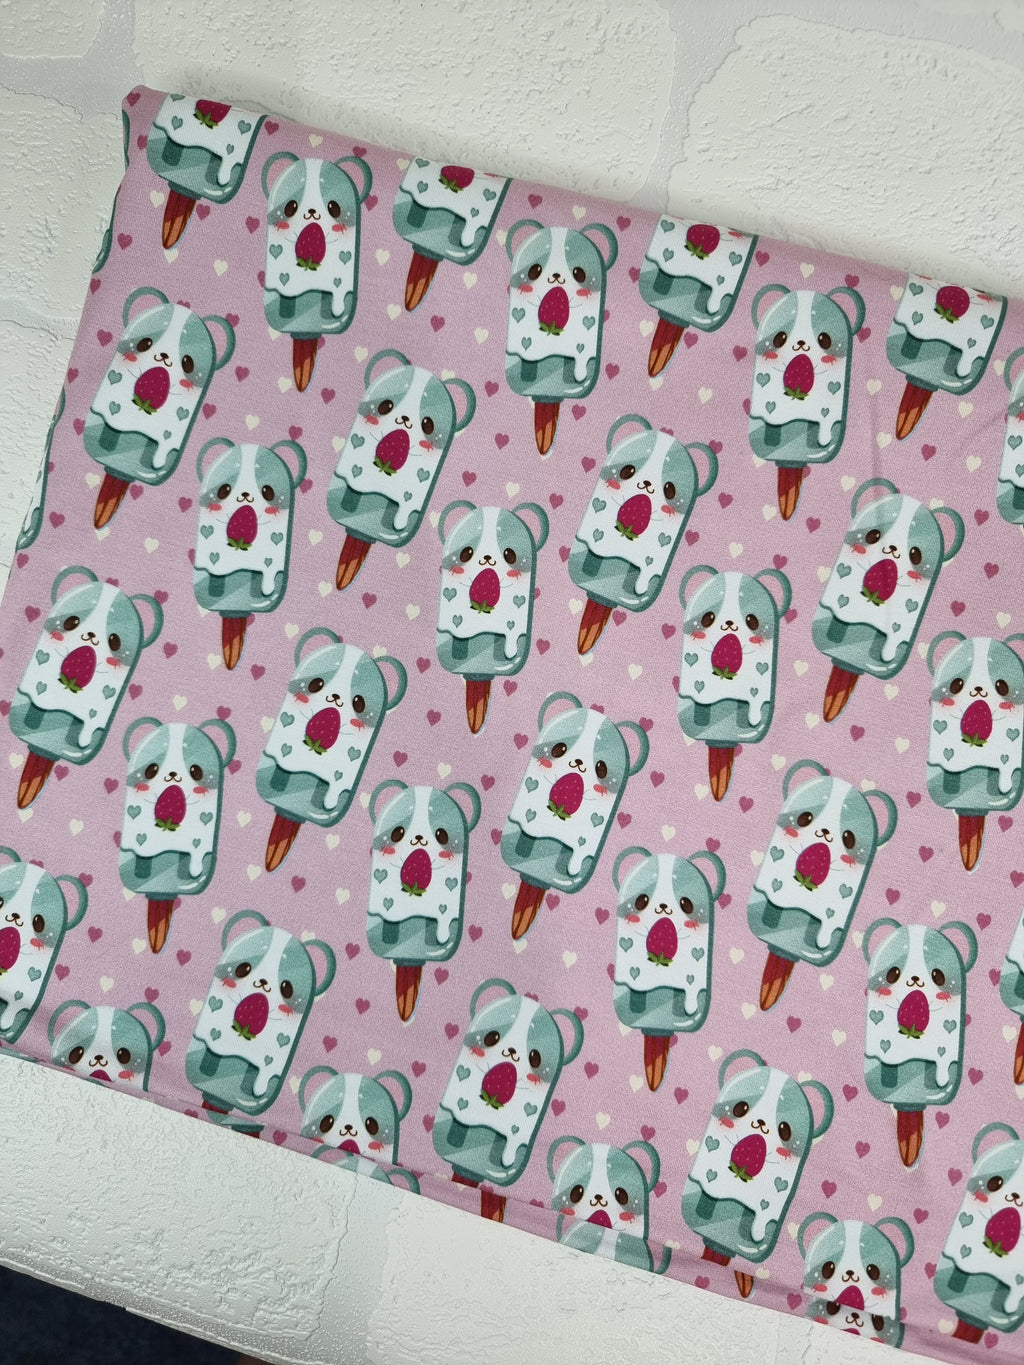 Adorable puppies on popsicle sticks on a pale pink background on bamboo lycra fabric.